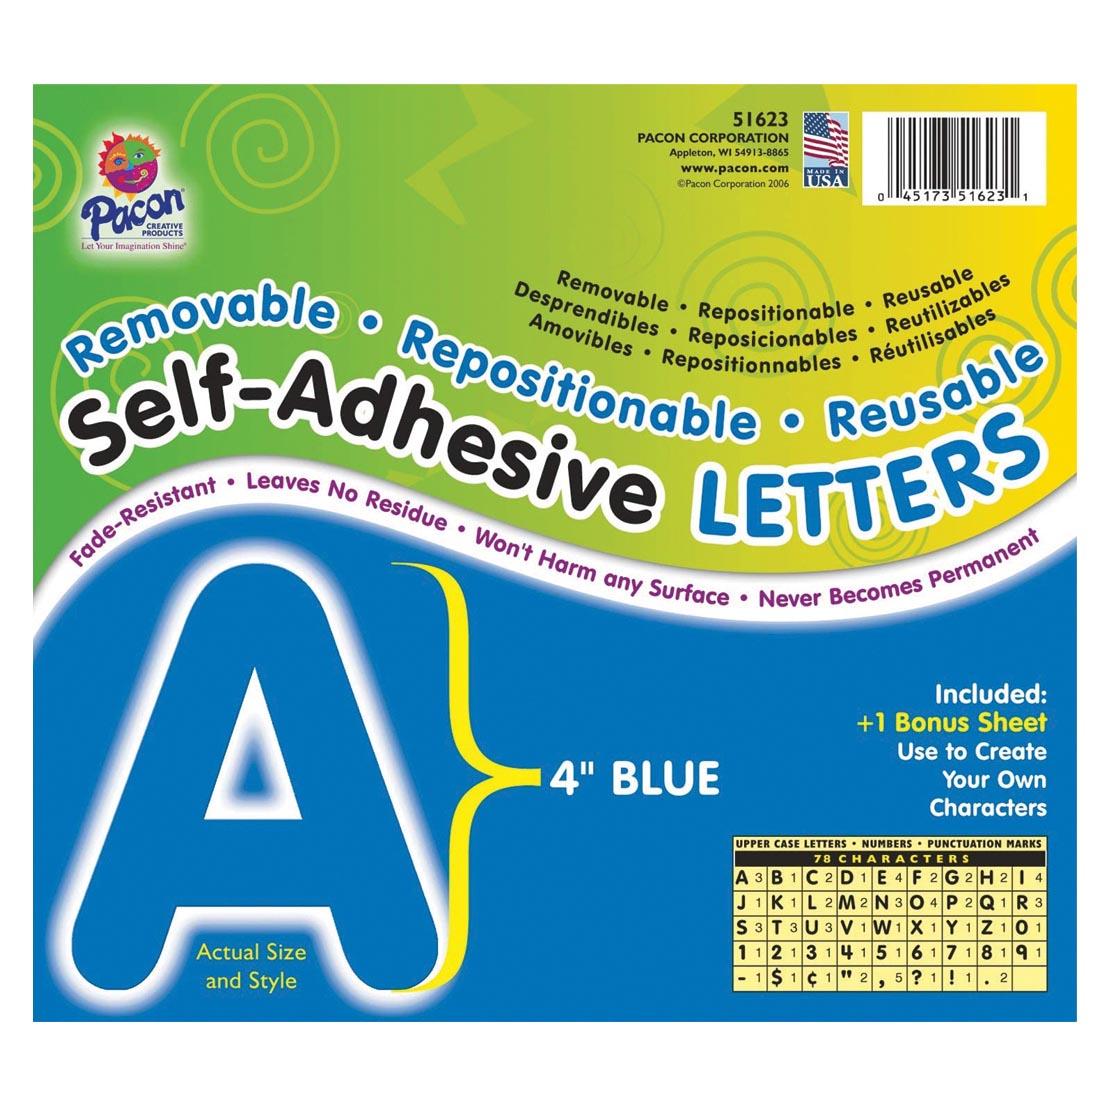 Pacon Reusable Self-Adhesive Vinyl Letters & Numbers Puffy Font 4" Blue